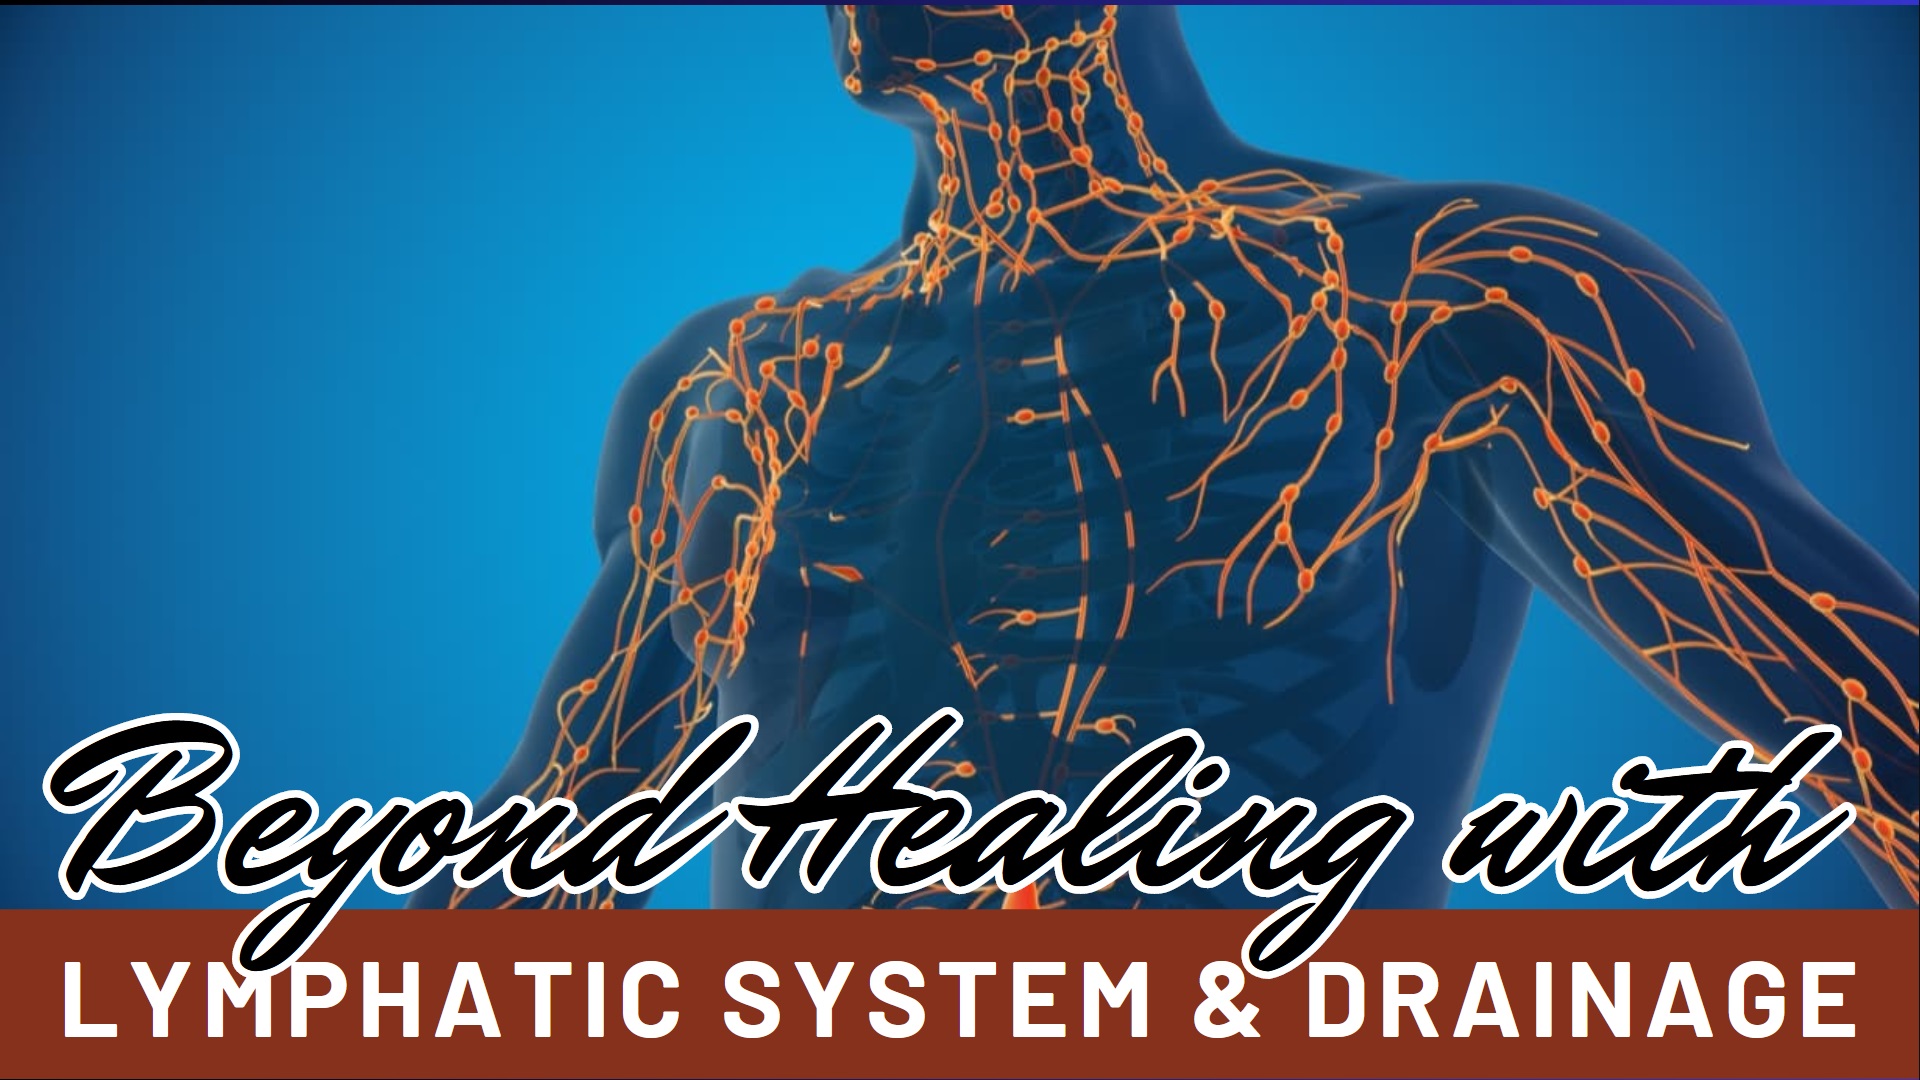 The Great Lymphatic System